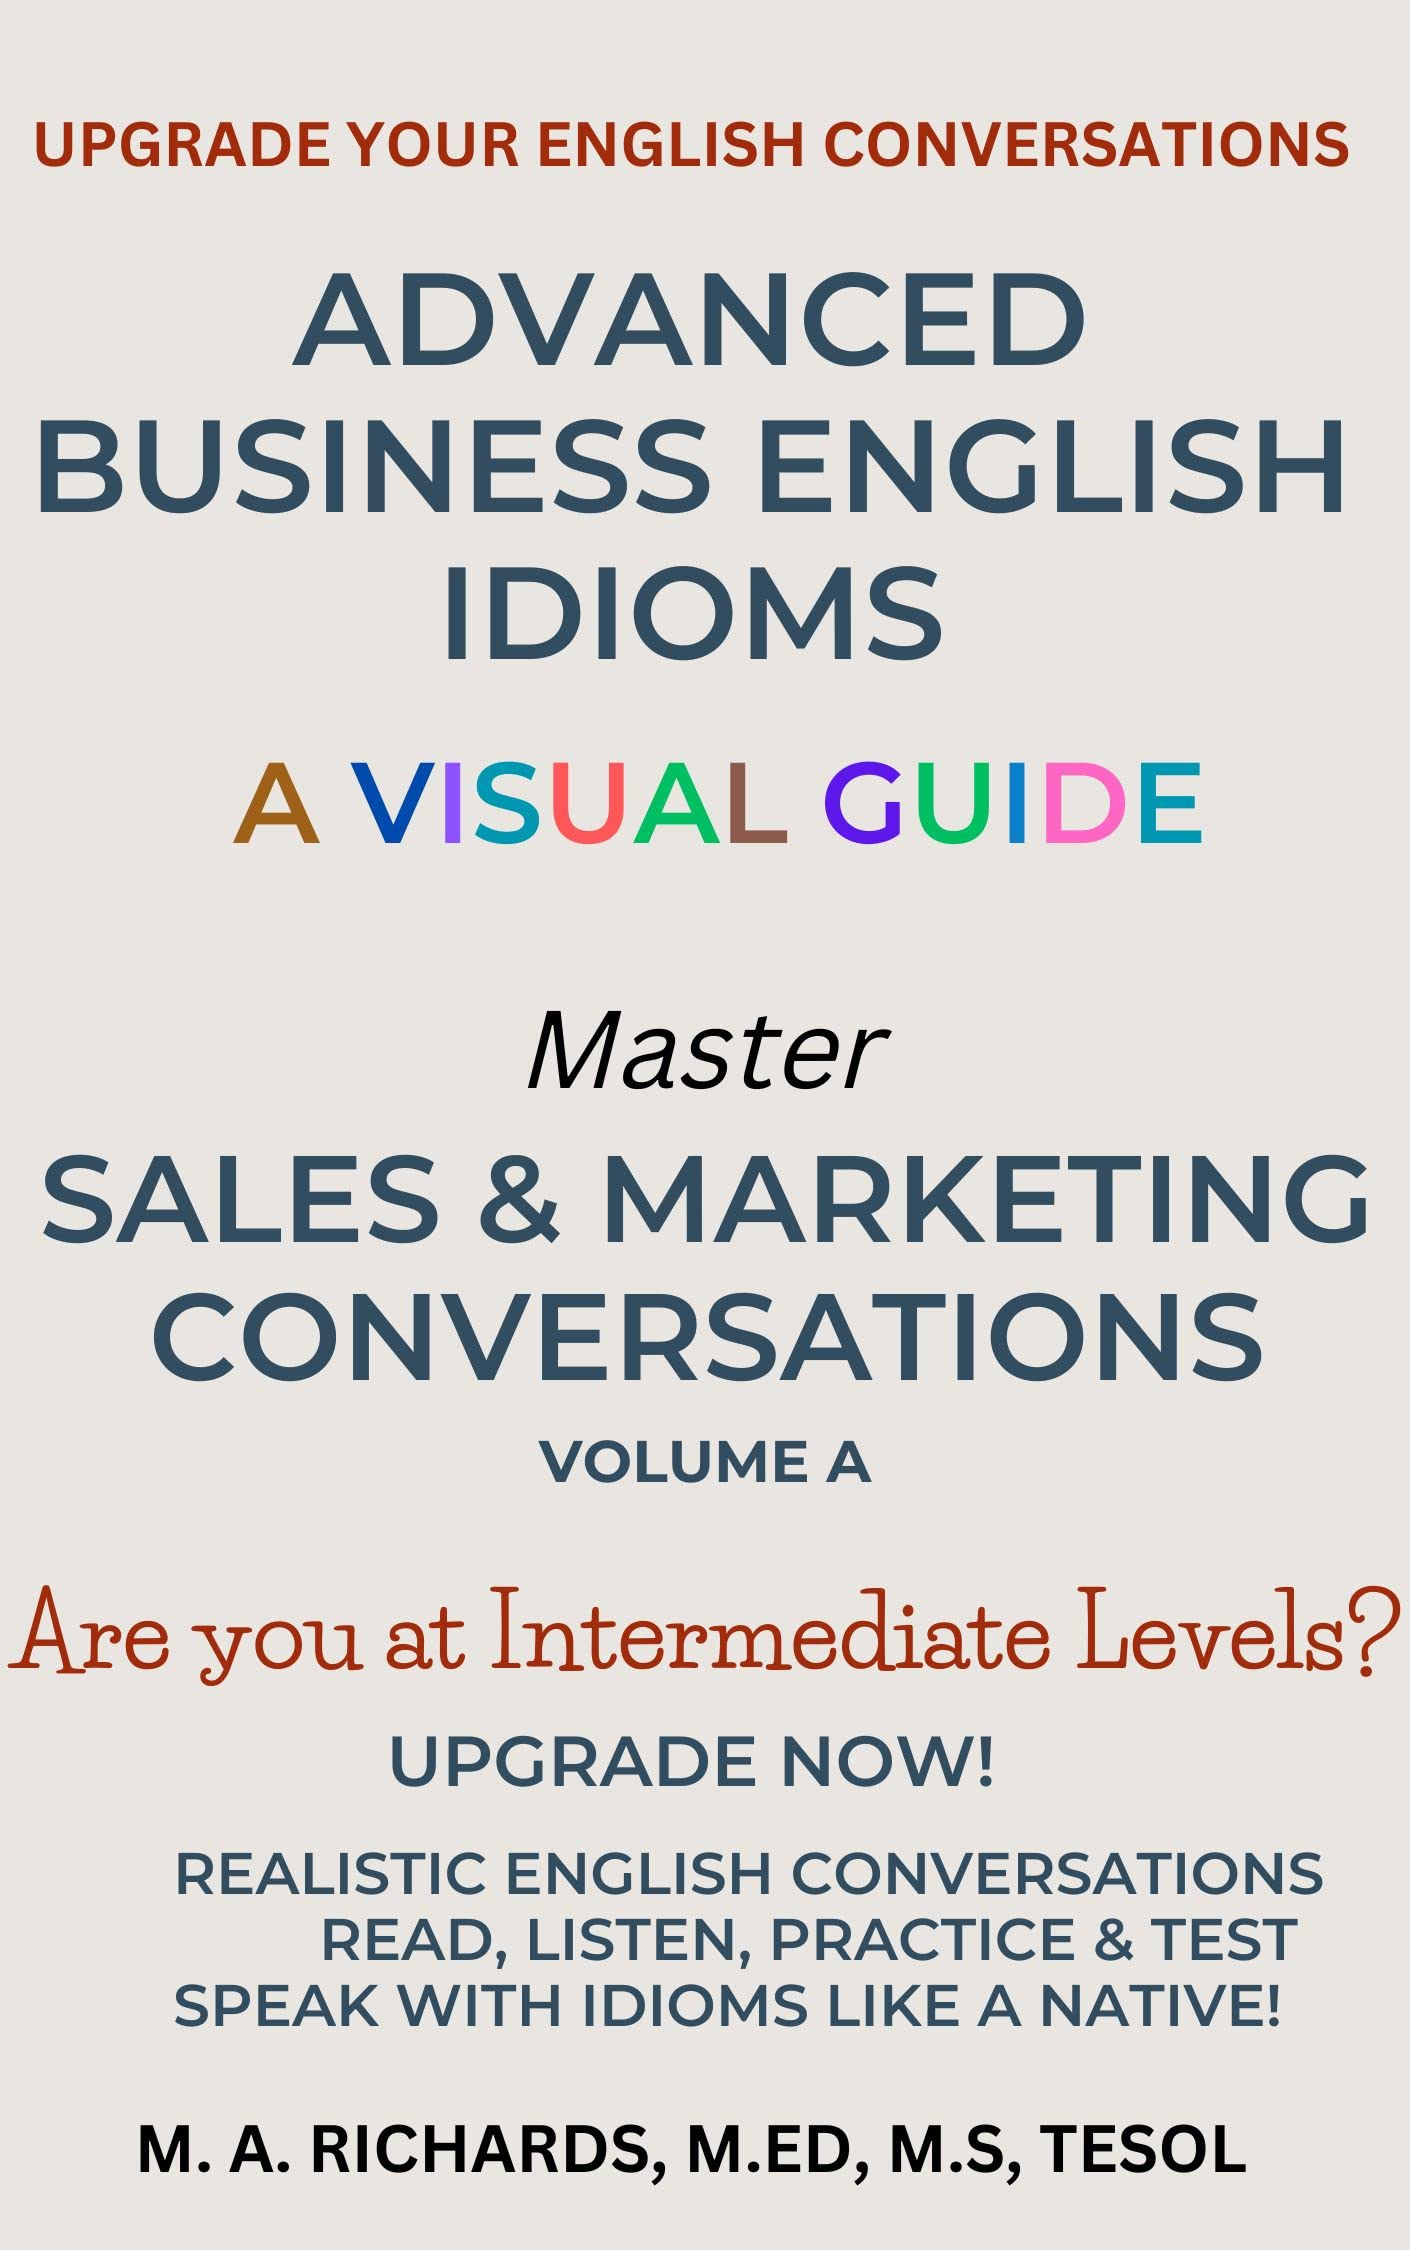 Advanced Business English Idioms Visual Guide: Master Sales & Marketing Conversations - Volume A